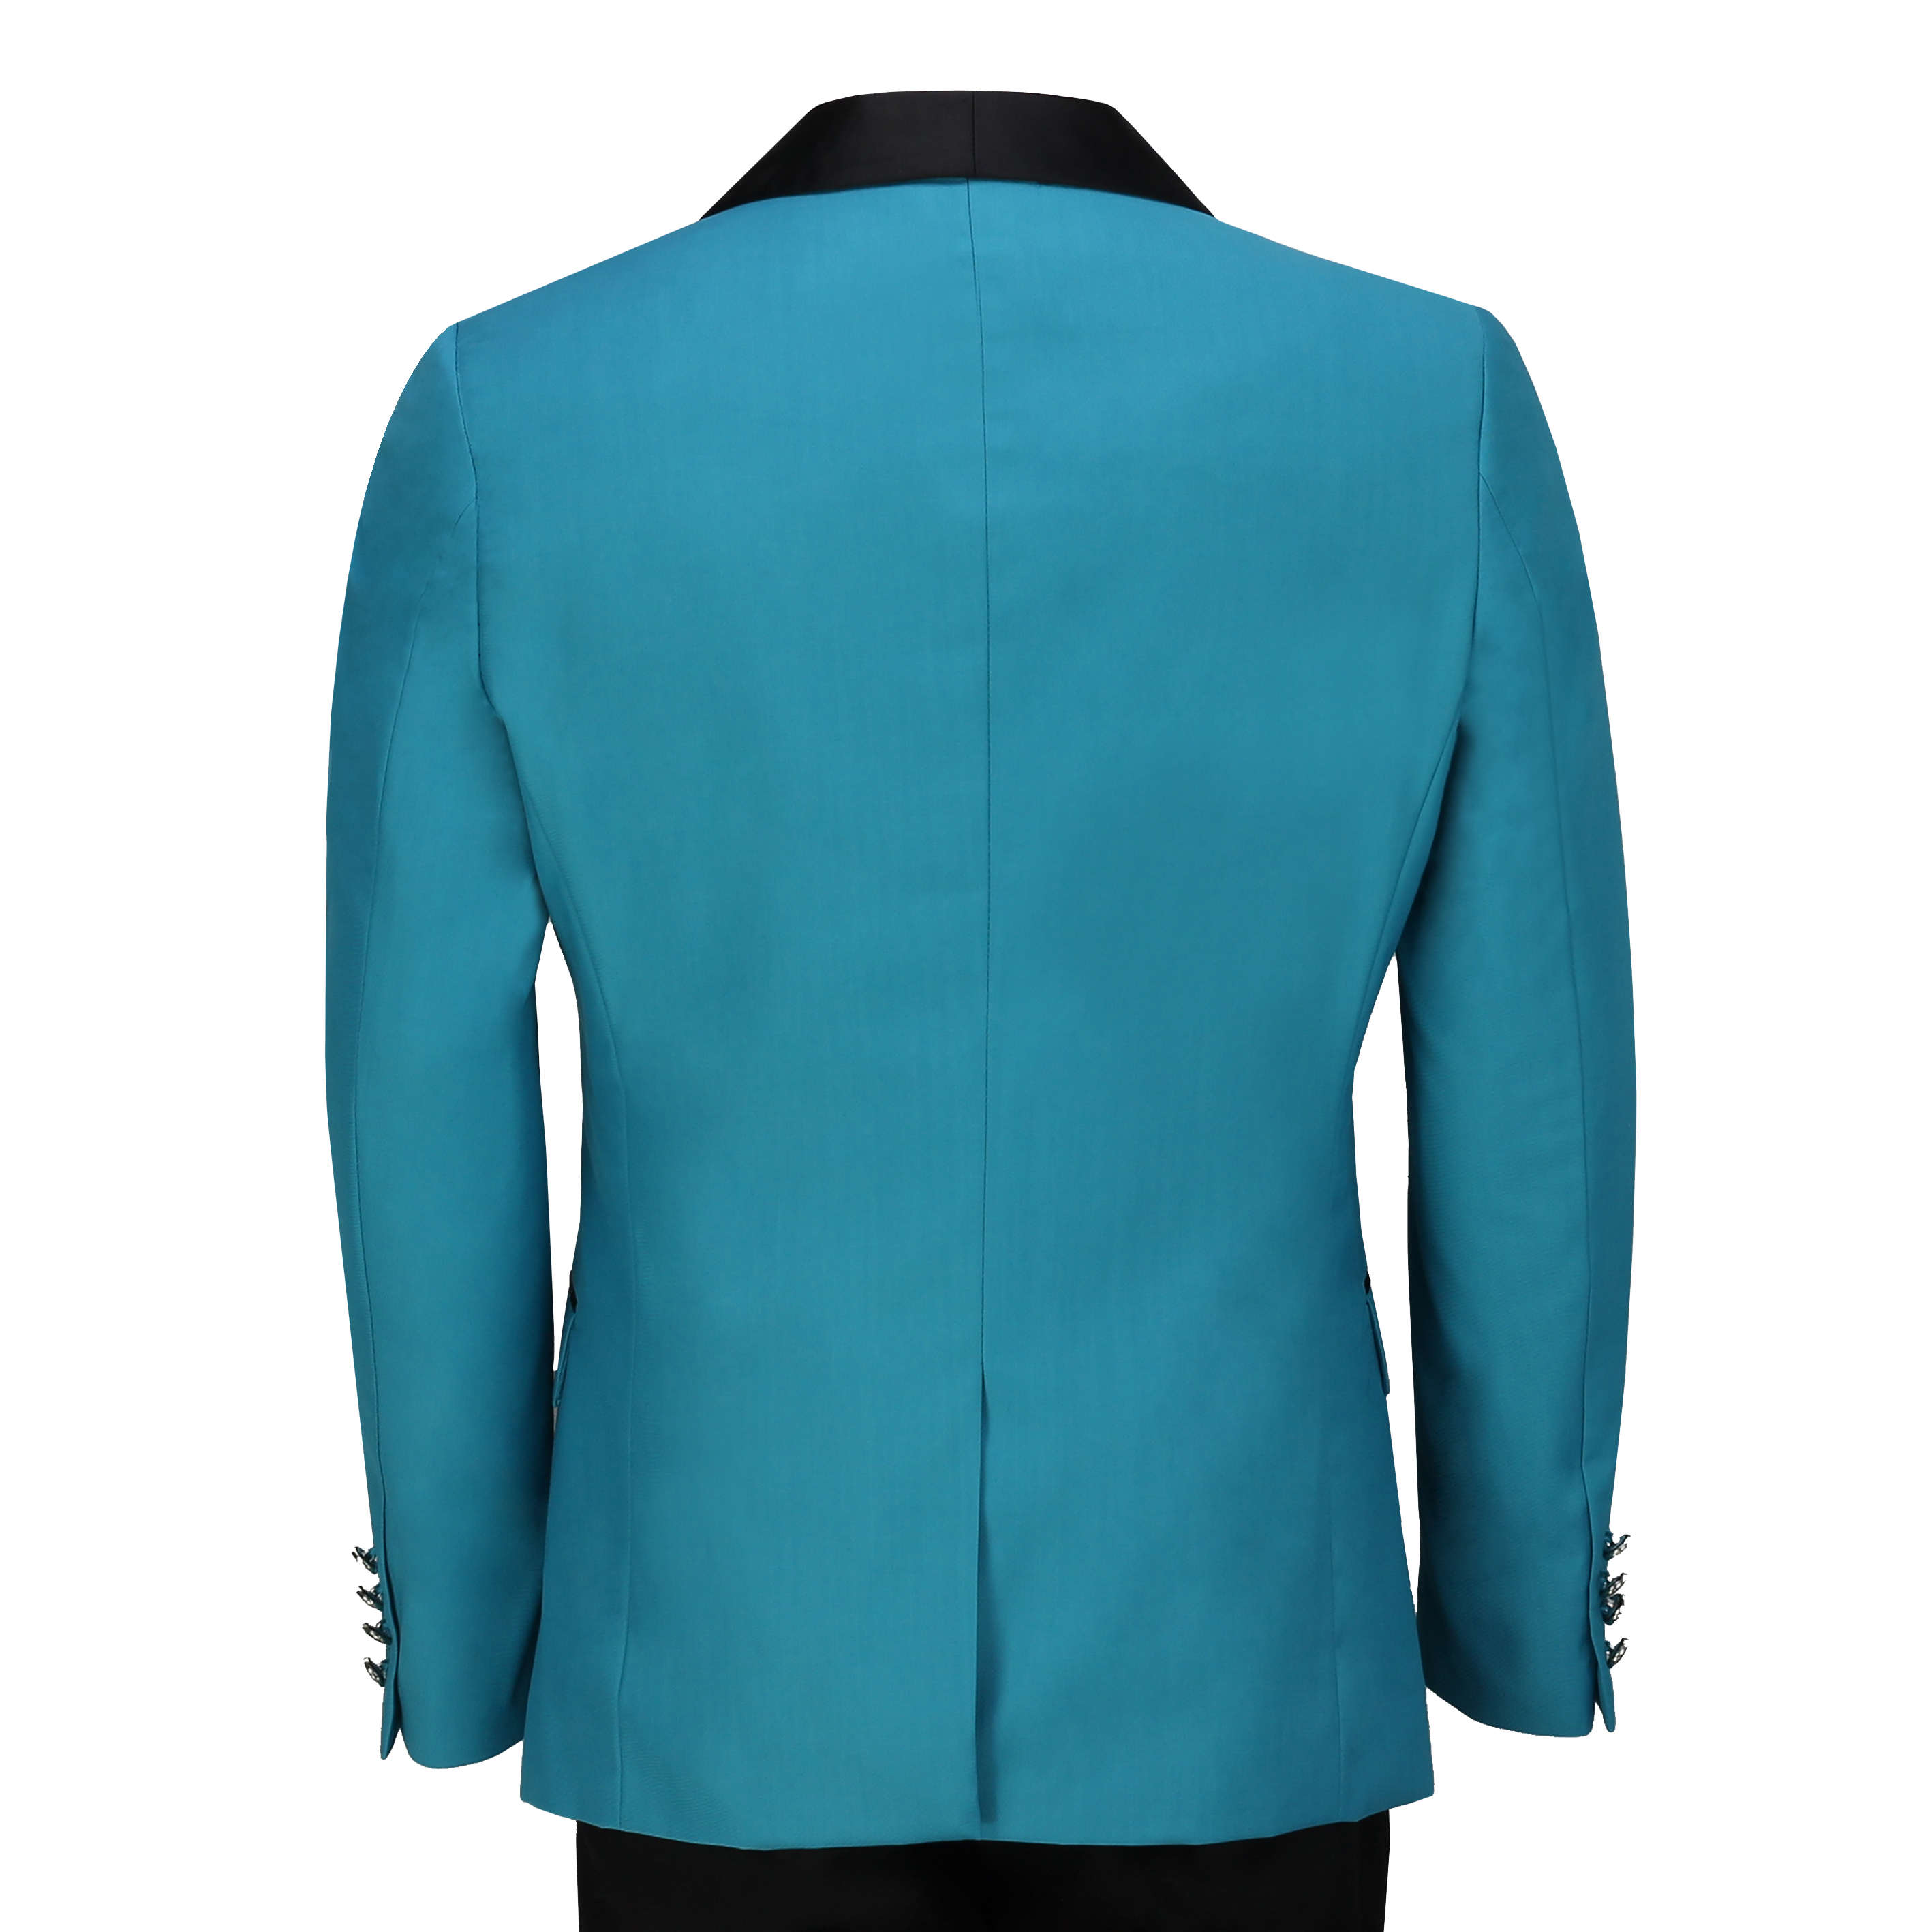 Mens 3 Piece Tuxedo Suit Wedding Party Tailored Fit Turquoise Blue ...